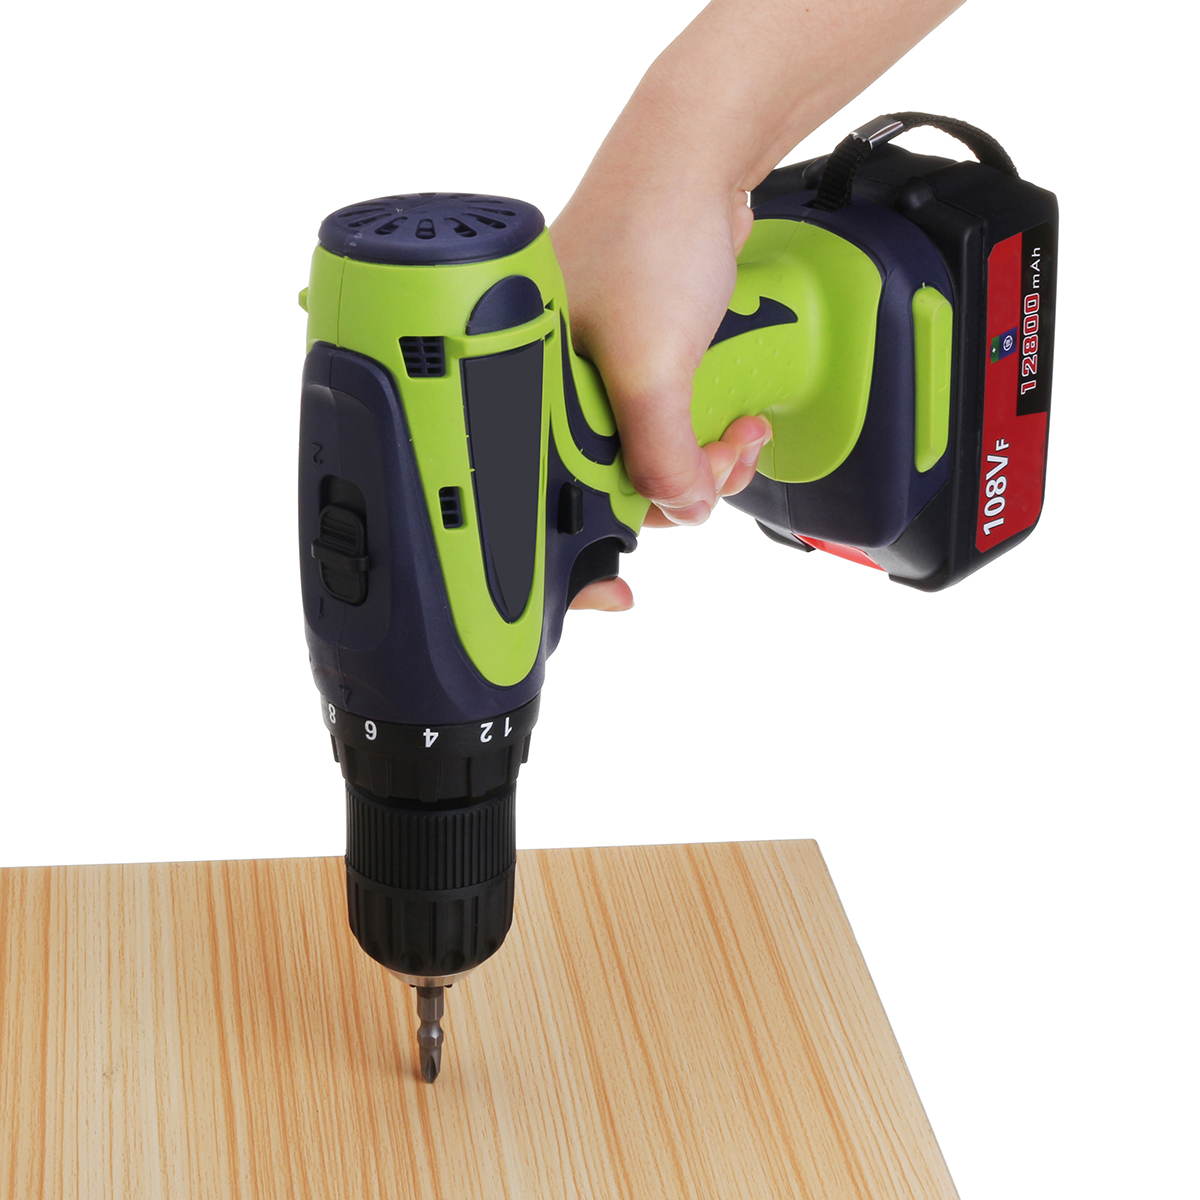 108VF-12800mAh-Dual-Speed-Cordless-Drill-Multifunctional-High-Power-Household-Electric-Drills-W-Acce-1457224-8